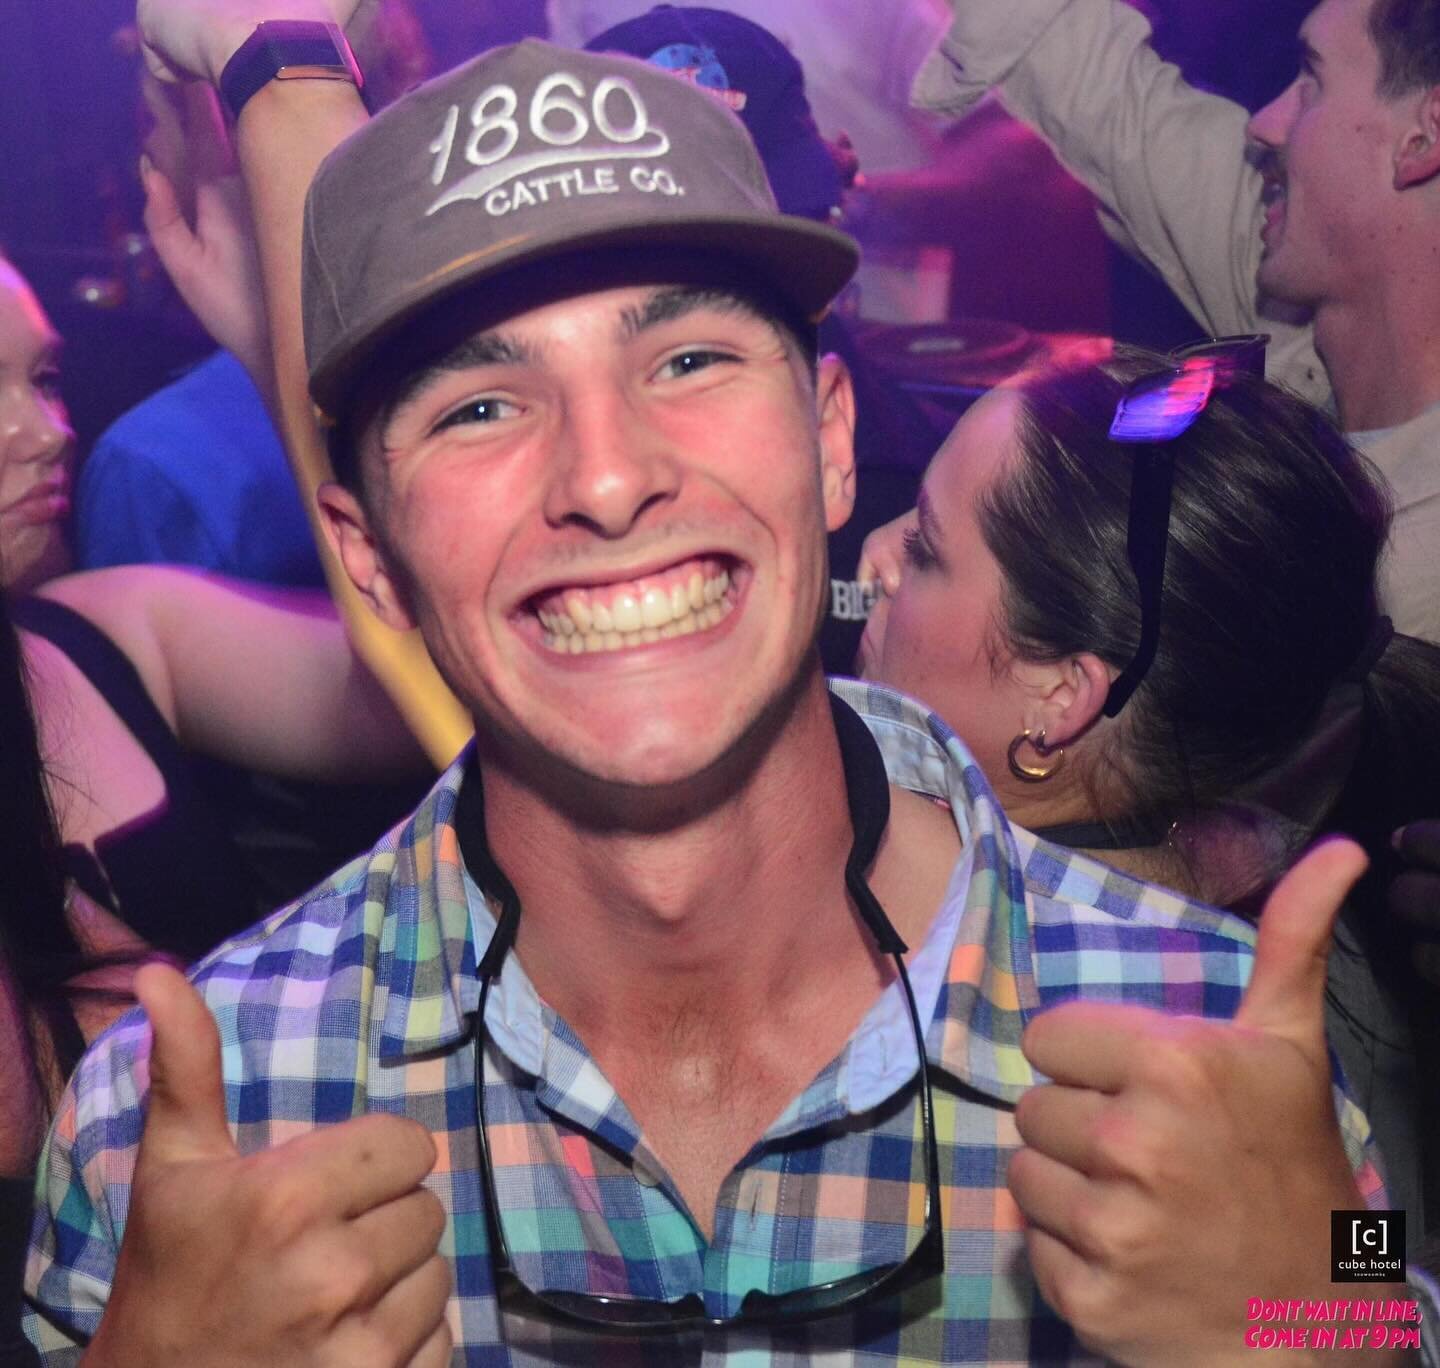 So many happy people pictures this week - Thanks to all who came downtown!!

#cubehotel #ravecave  #dance #club #dj #party #cocktails #karaoke #toowoomba